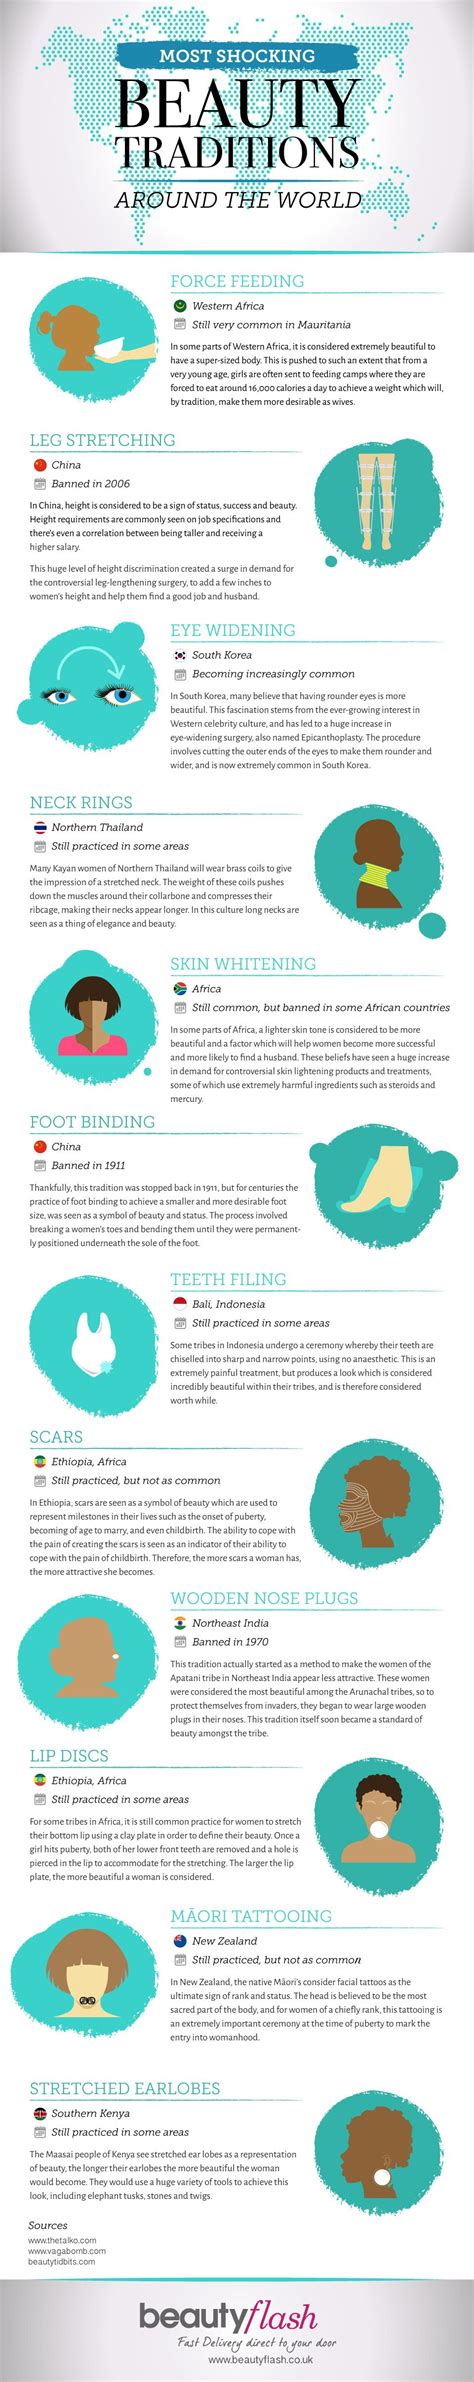 Most Shocking Beauty Traditions Around The World Infographic ~ Visualistan